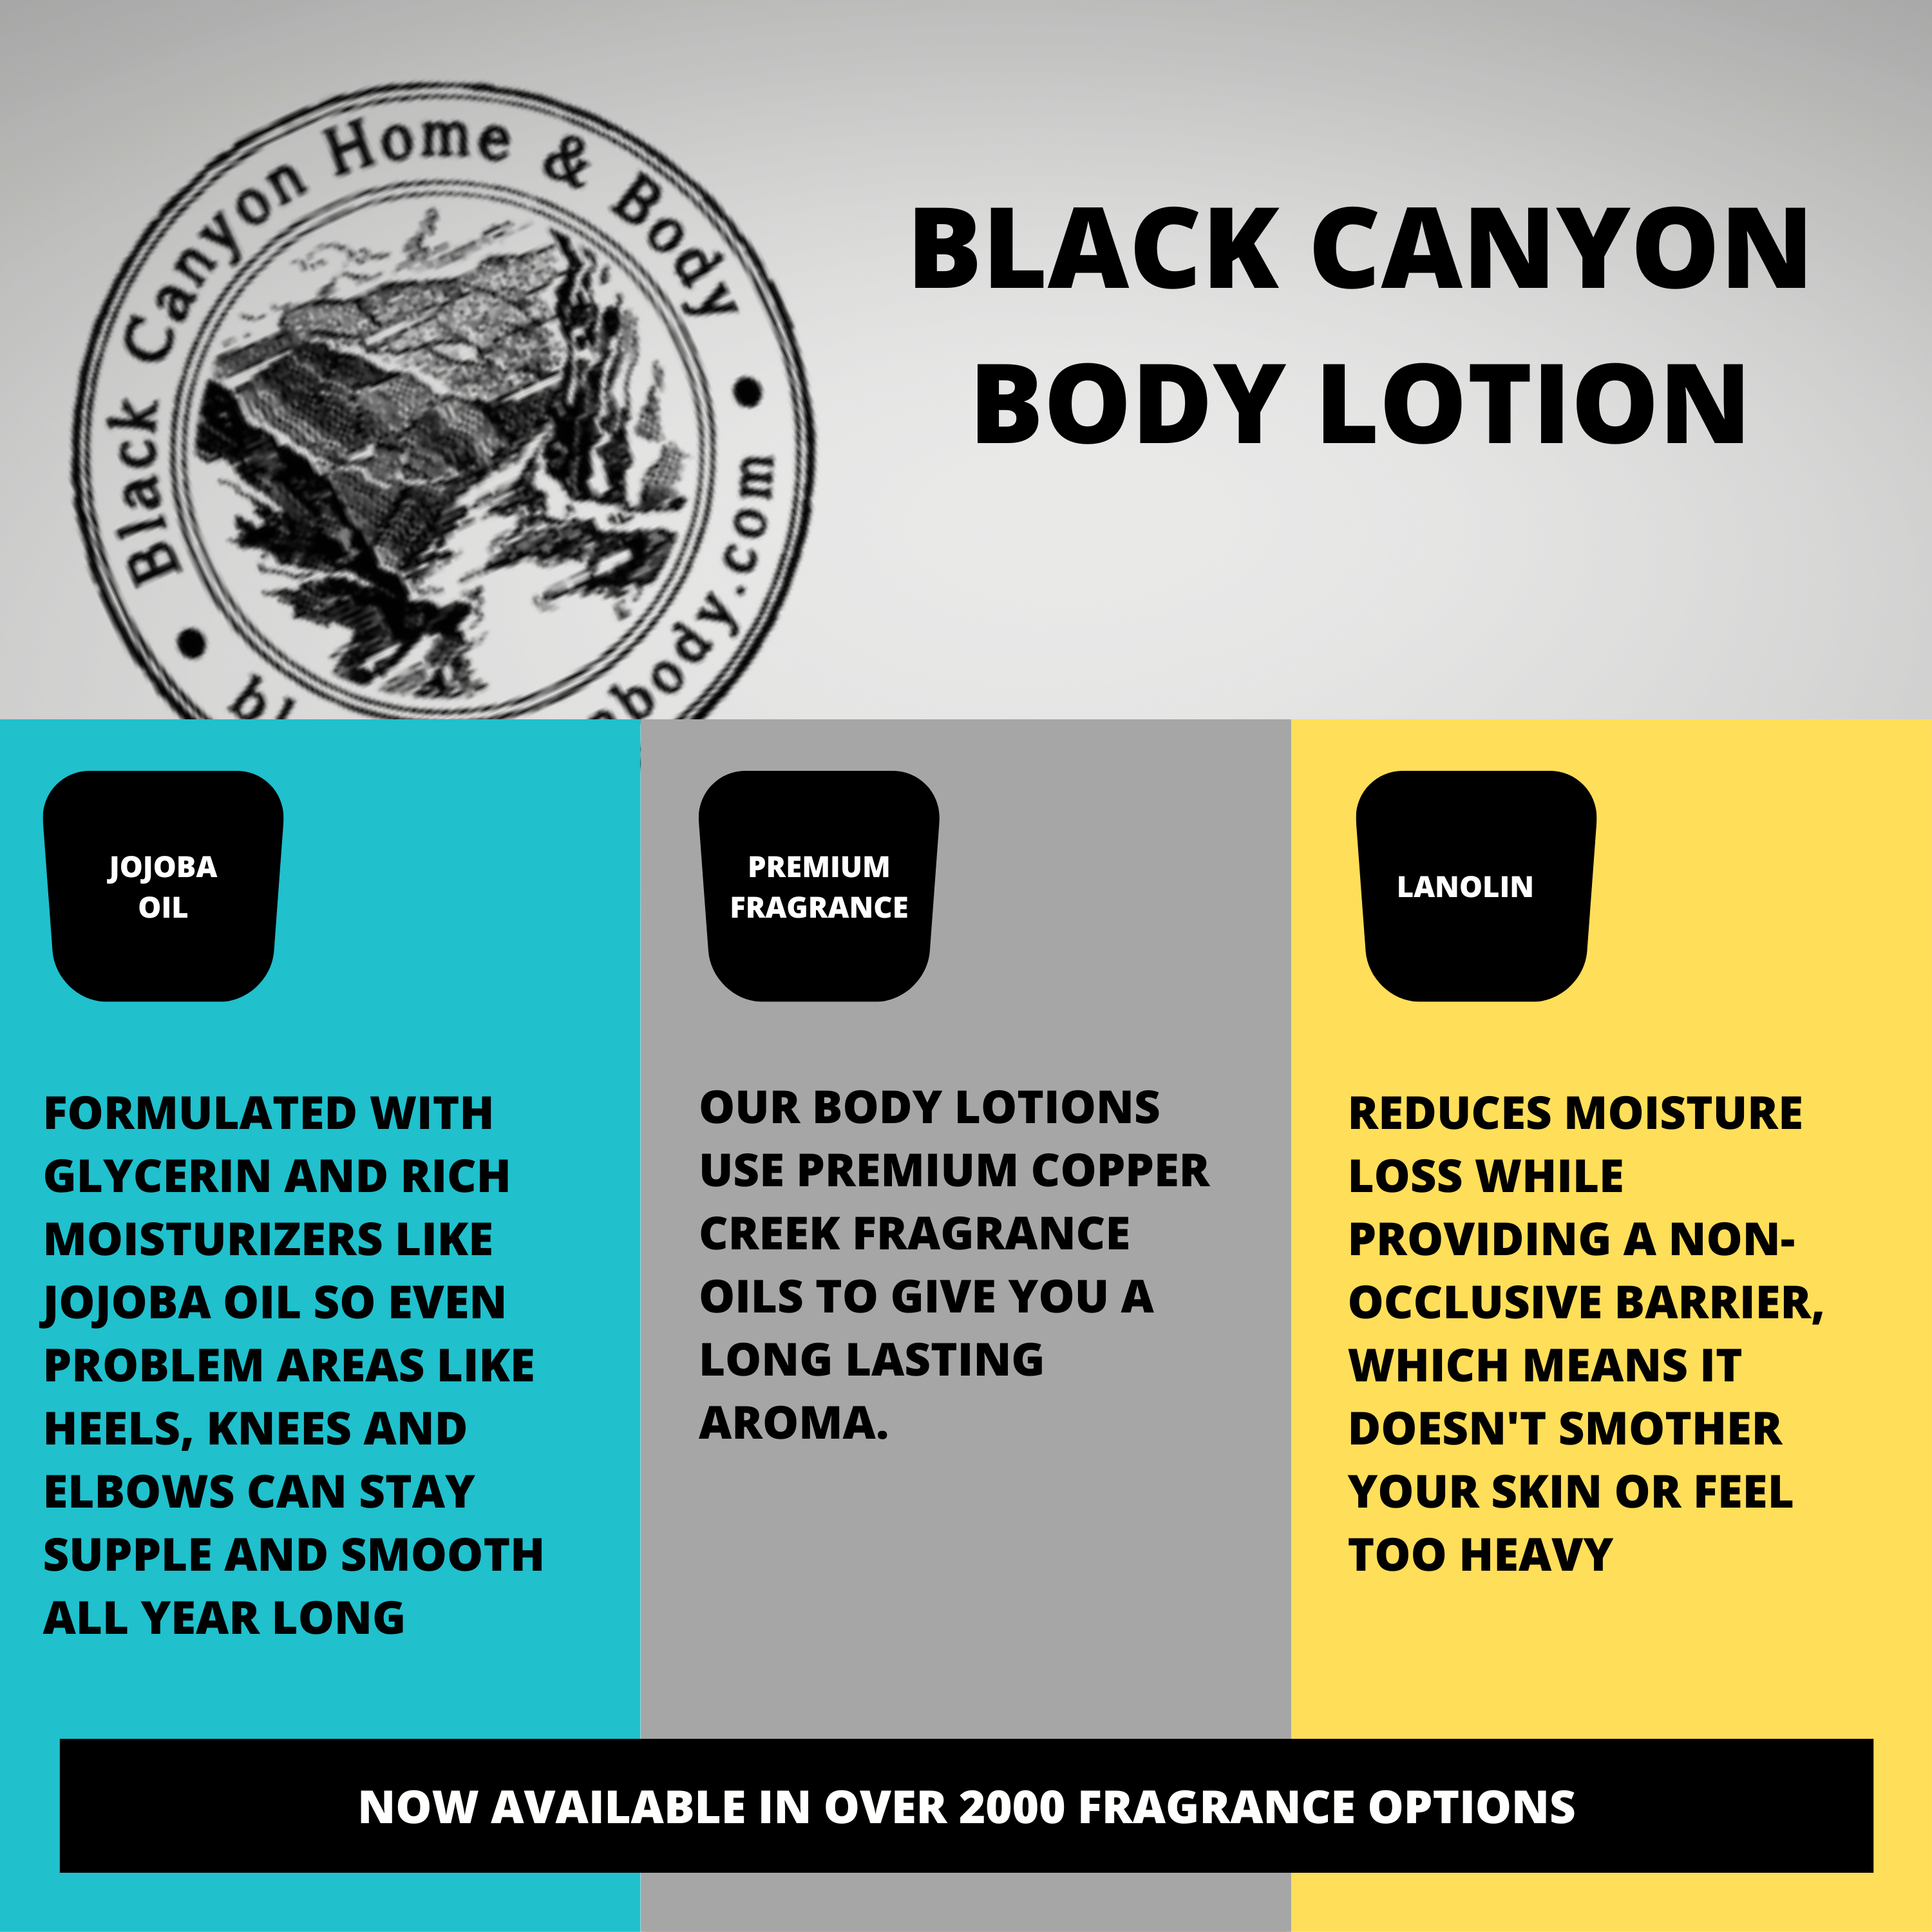 Black Canyon Bamboo Citrus & Teak Scented Luxury Body Lotion with Lanolin and Jojoba Oil